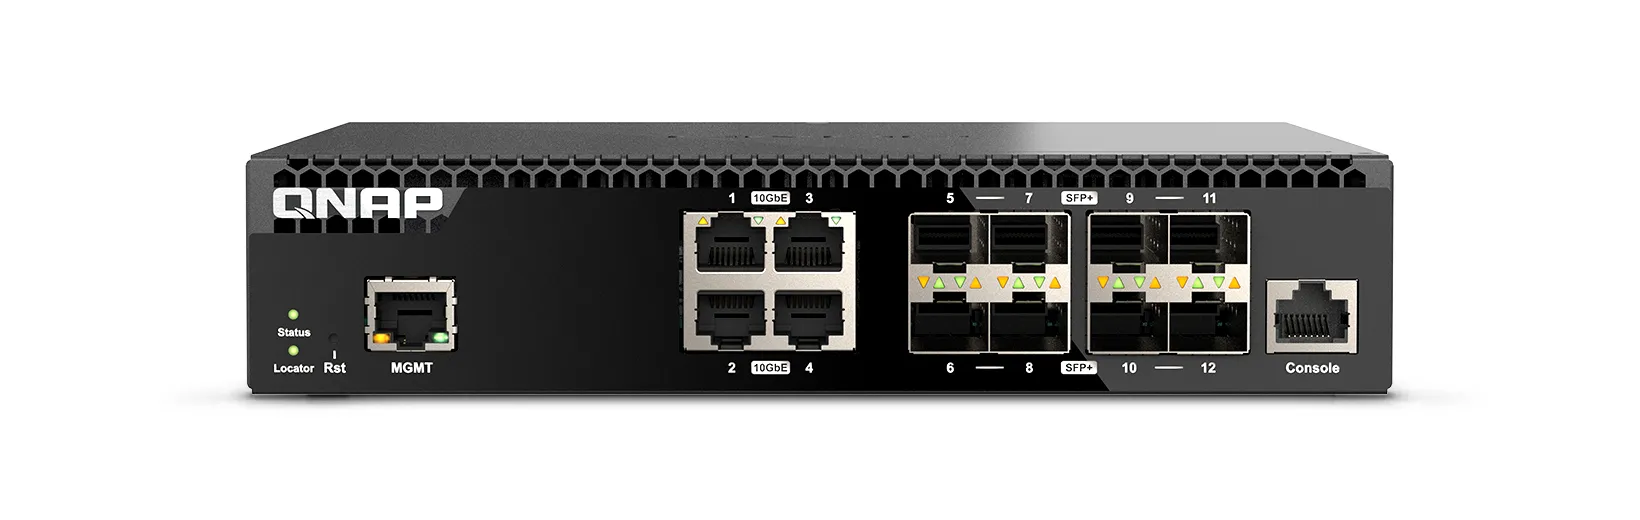 Vente Switchs et Hubs QNAP QSW-M3212R-8S4T Managed Switch 12 port of 10GbE